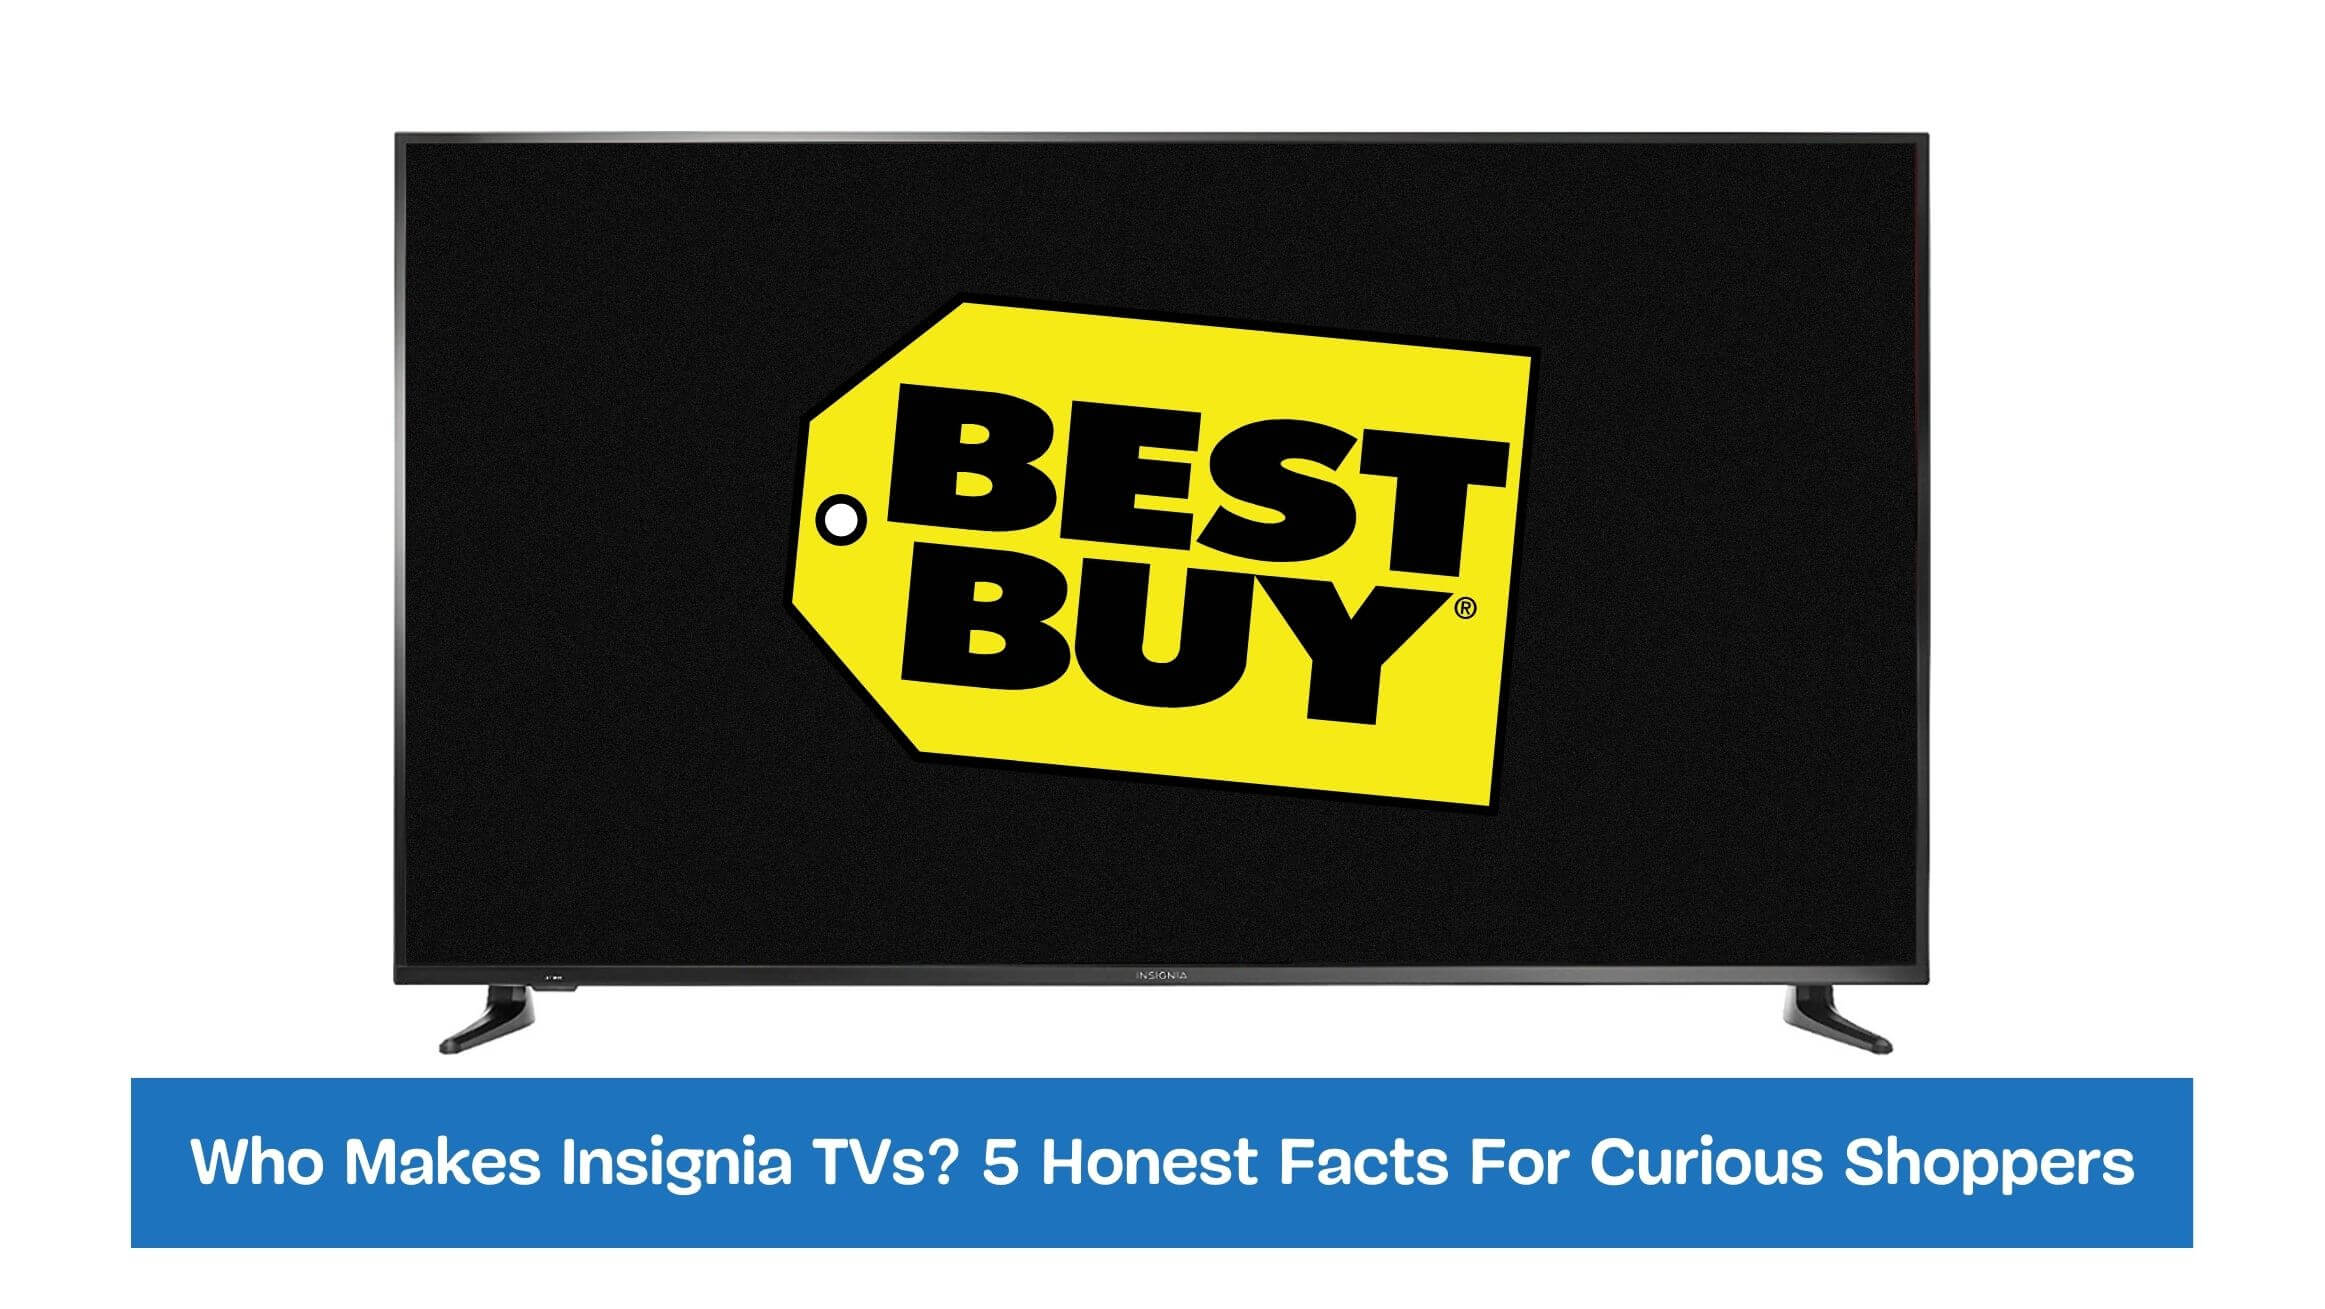 5 Honest Facts About Who Makes Insignia TVs For Curious Shoppers